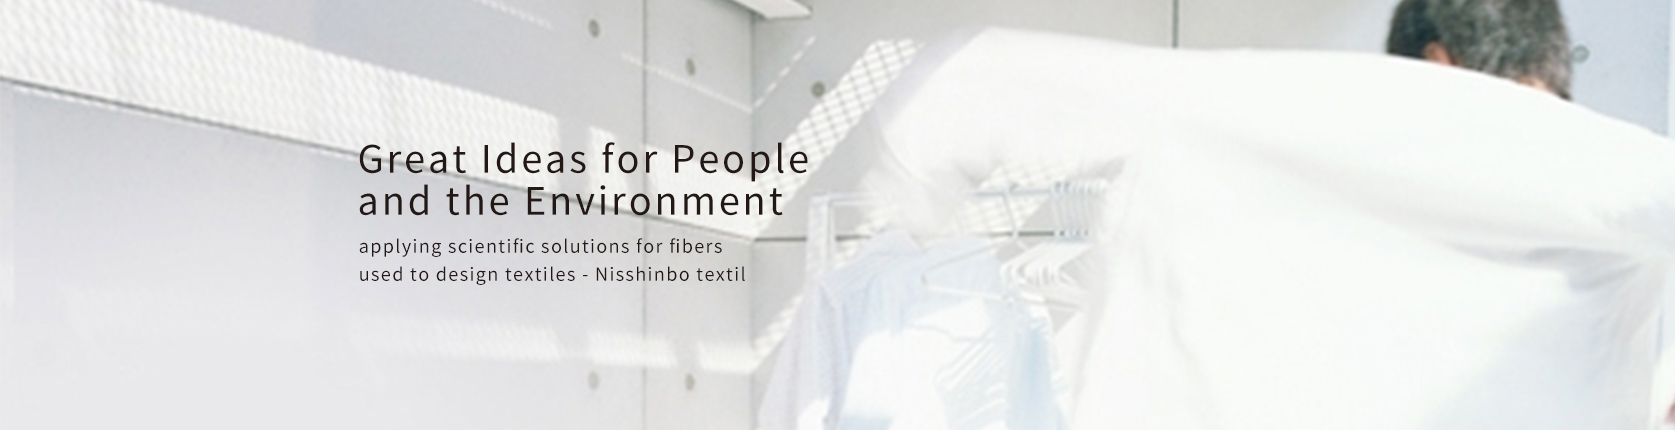 Great Ideas for People and the Environment applying scientific solutions for fibers used to design textiles - Nisshinbo textil